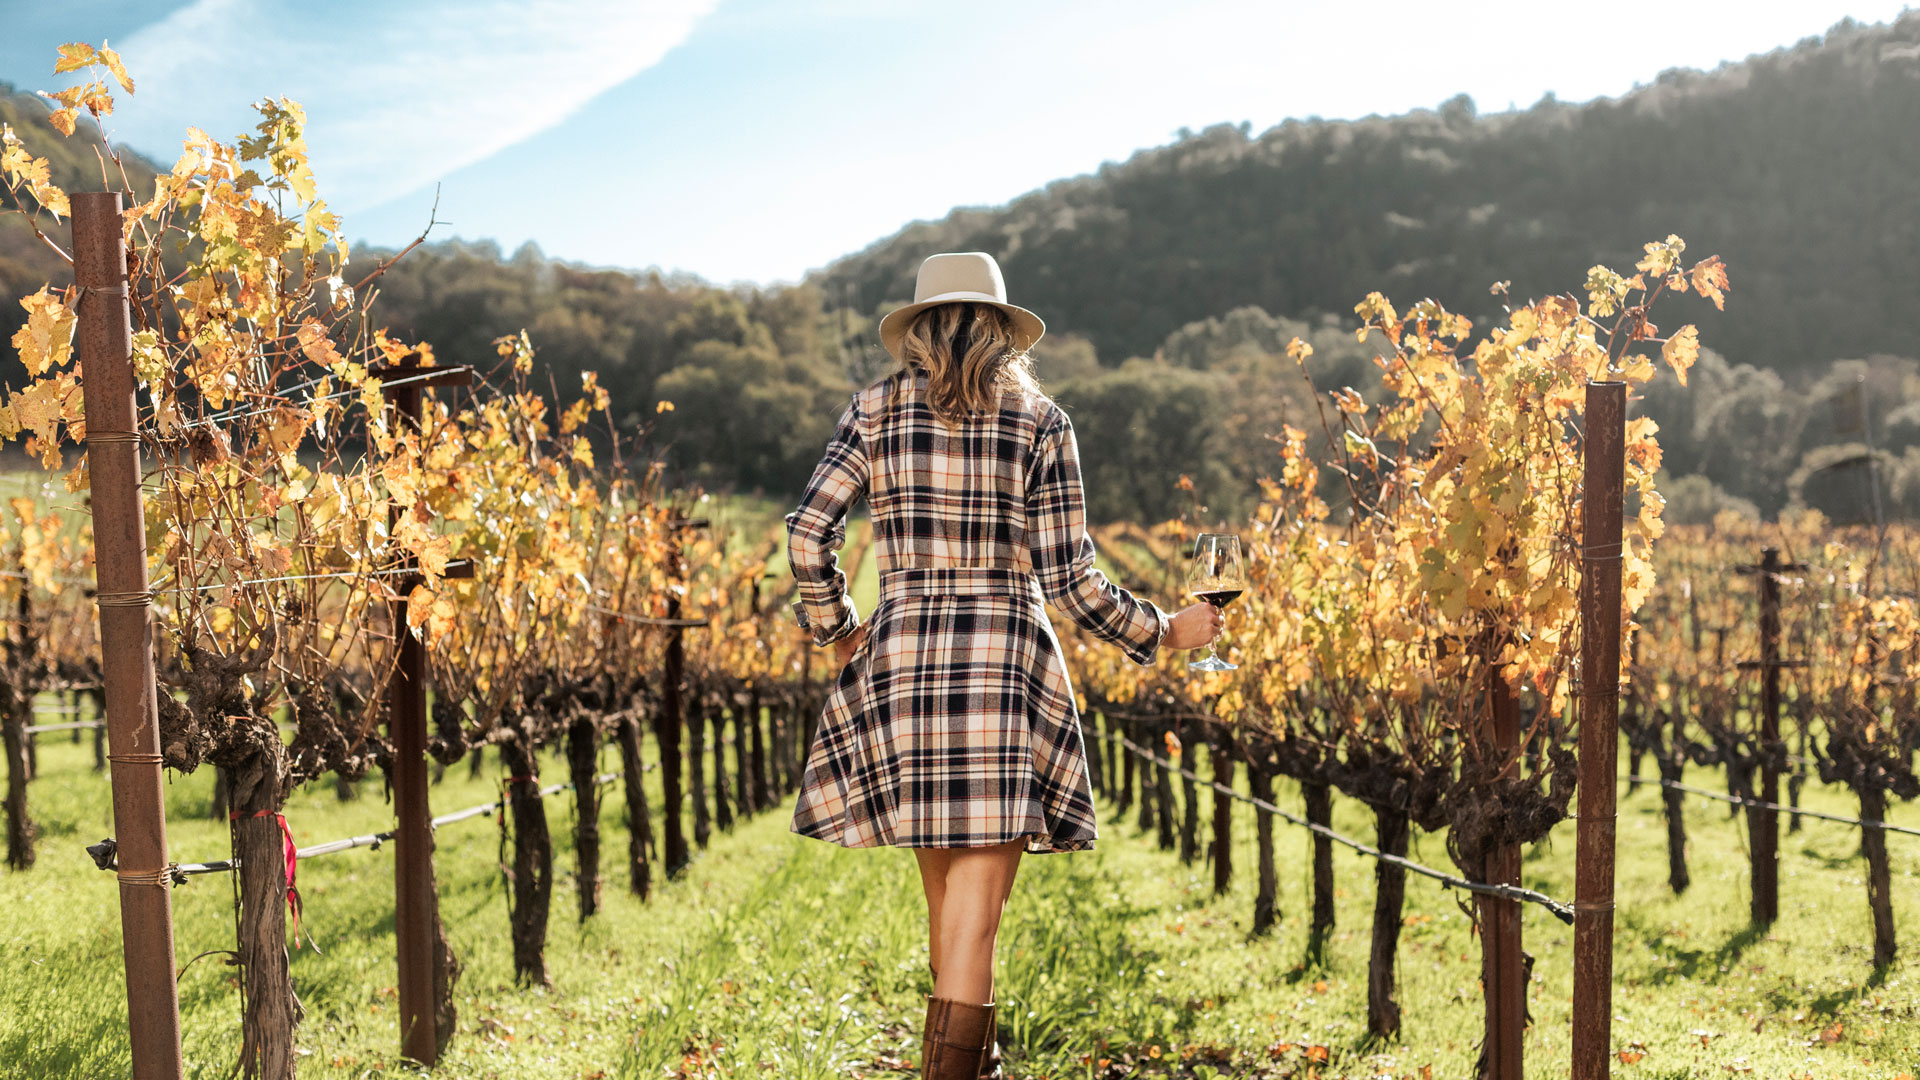 Napa Lifestyle Photography at Chappellet Vineyard by Frank Gutierrez